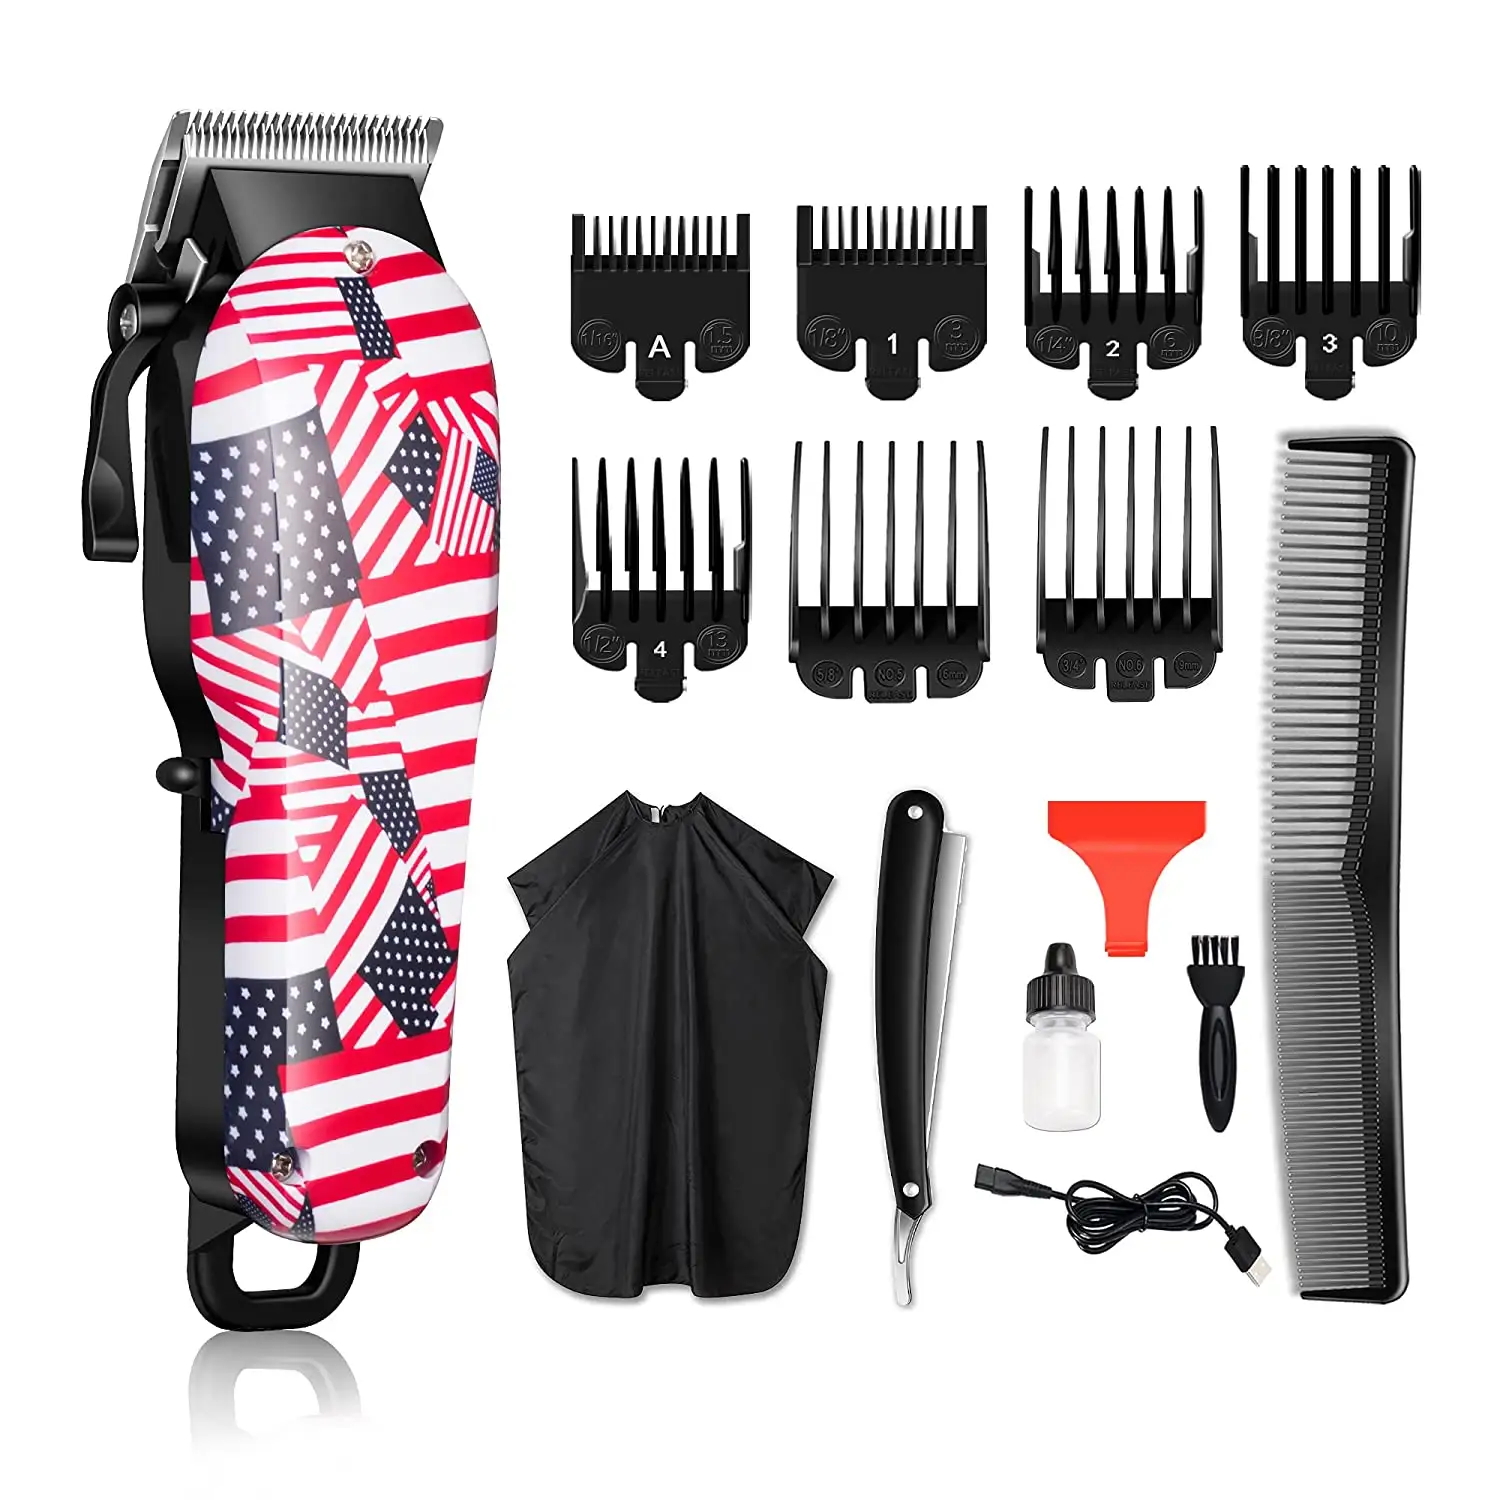 MRY Hair Clippers Men Professional Cordless Clippers Hair Cutting Rechargeable Hair Trimmer For Men Grooming Kit